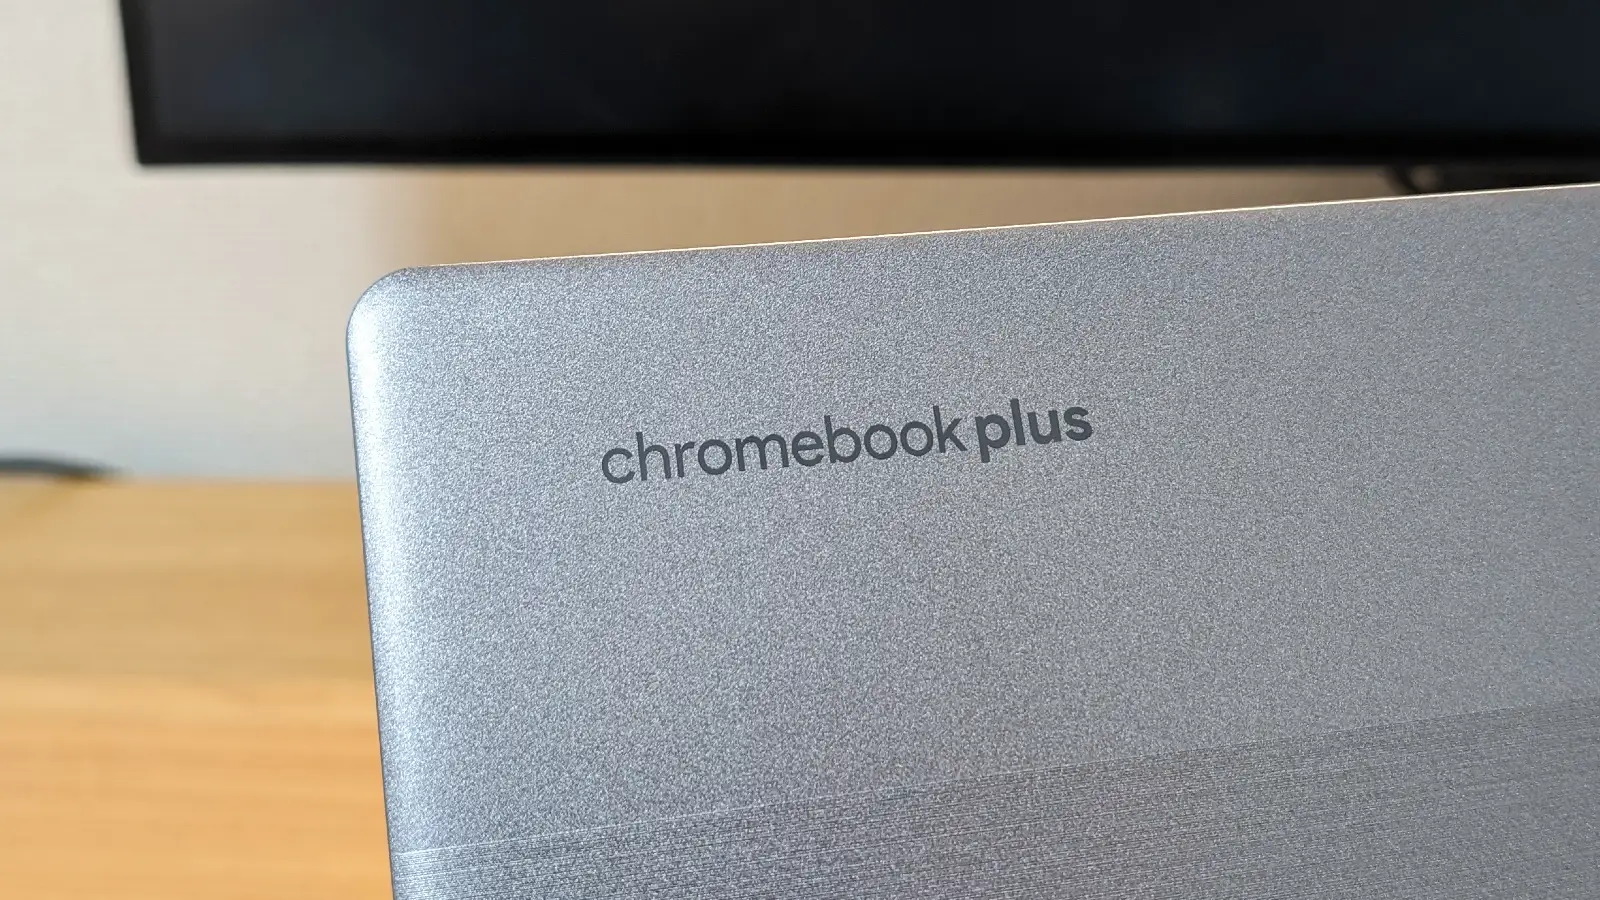 New and changed features added in ChromeOS 124 |